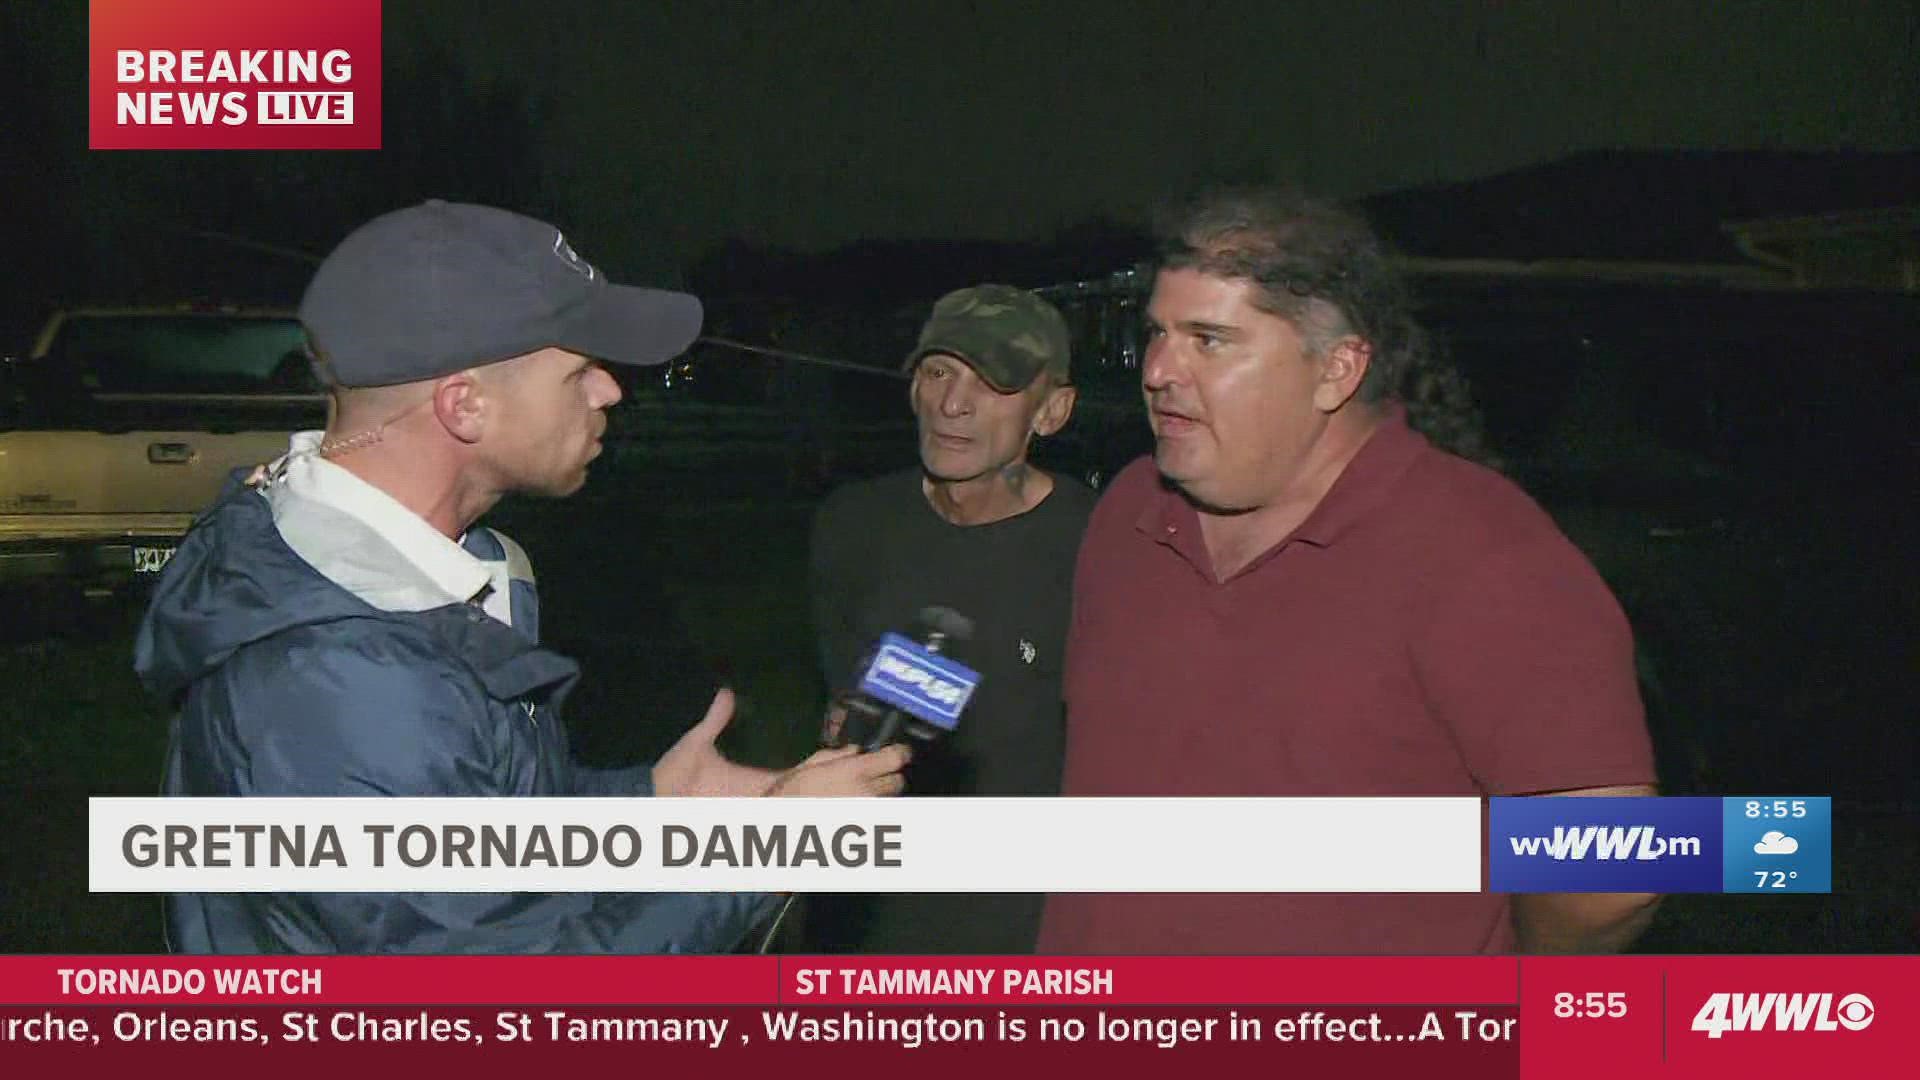 Neighbors we spoke with said they didn't expect the weather to get this bad because tornadoes never hit their area.